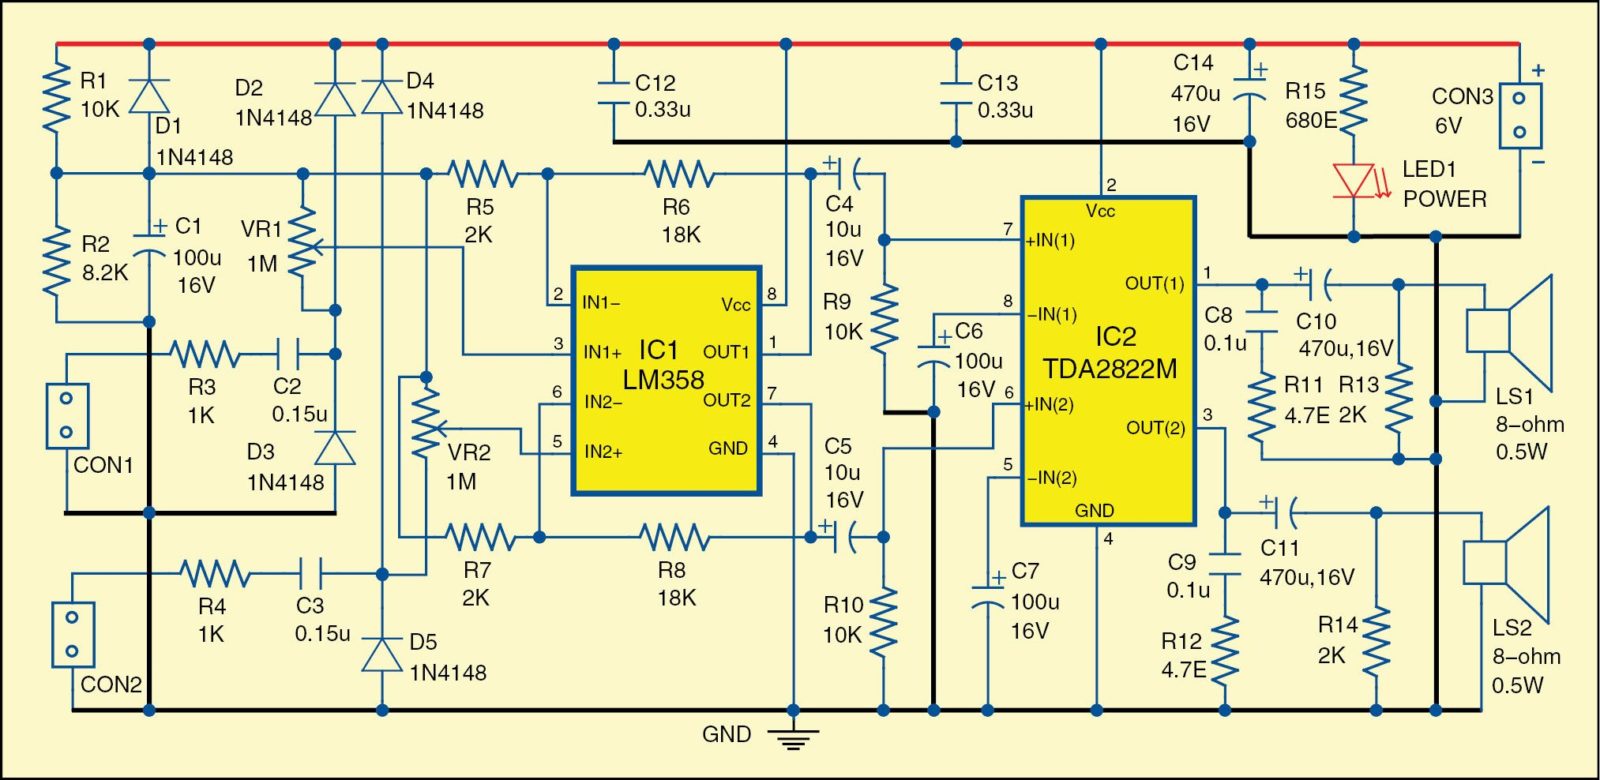 Fig. 1: Circuit diagram of the dual audio signal tracer